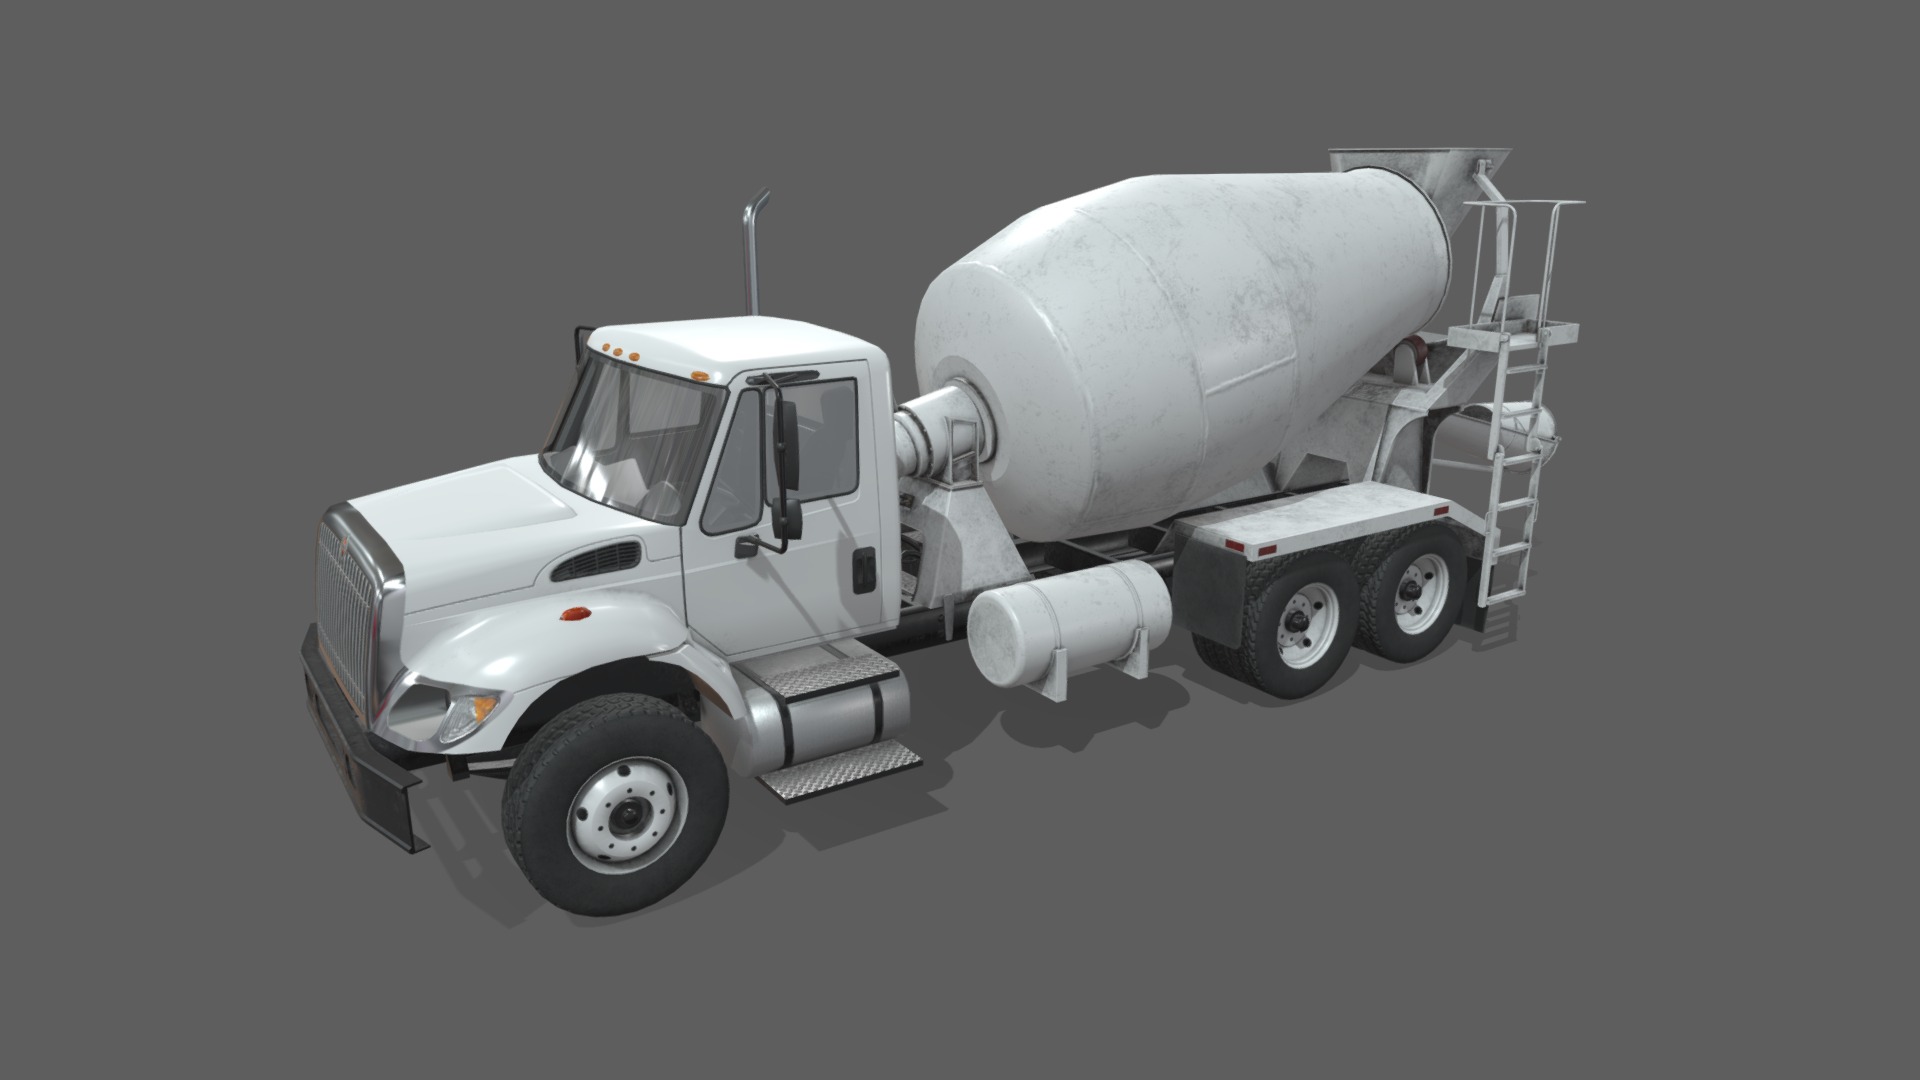 3D model International 7400 Mixer - This is a 3D model of the International 7400 Mixer. The 3D model is about a white truck with a large tank.